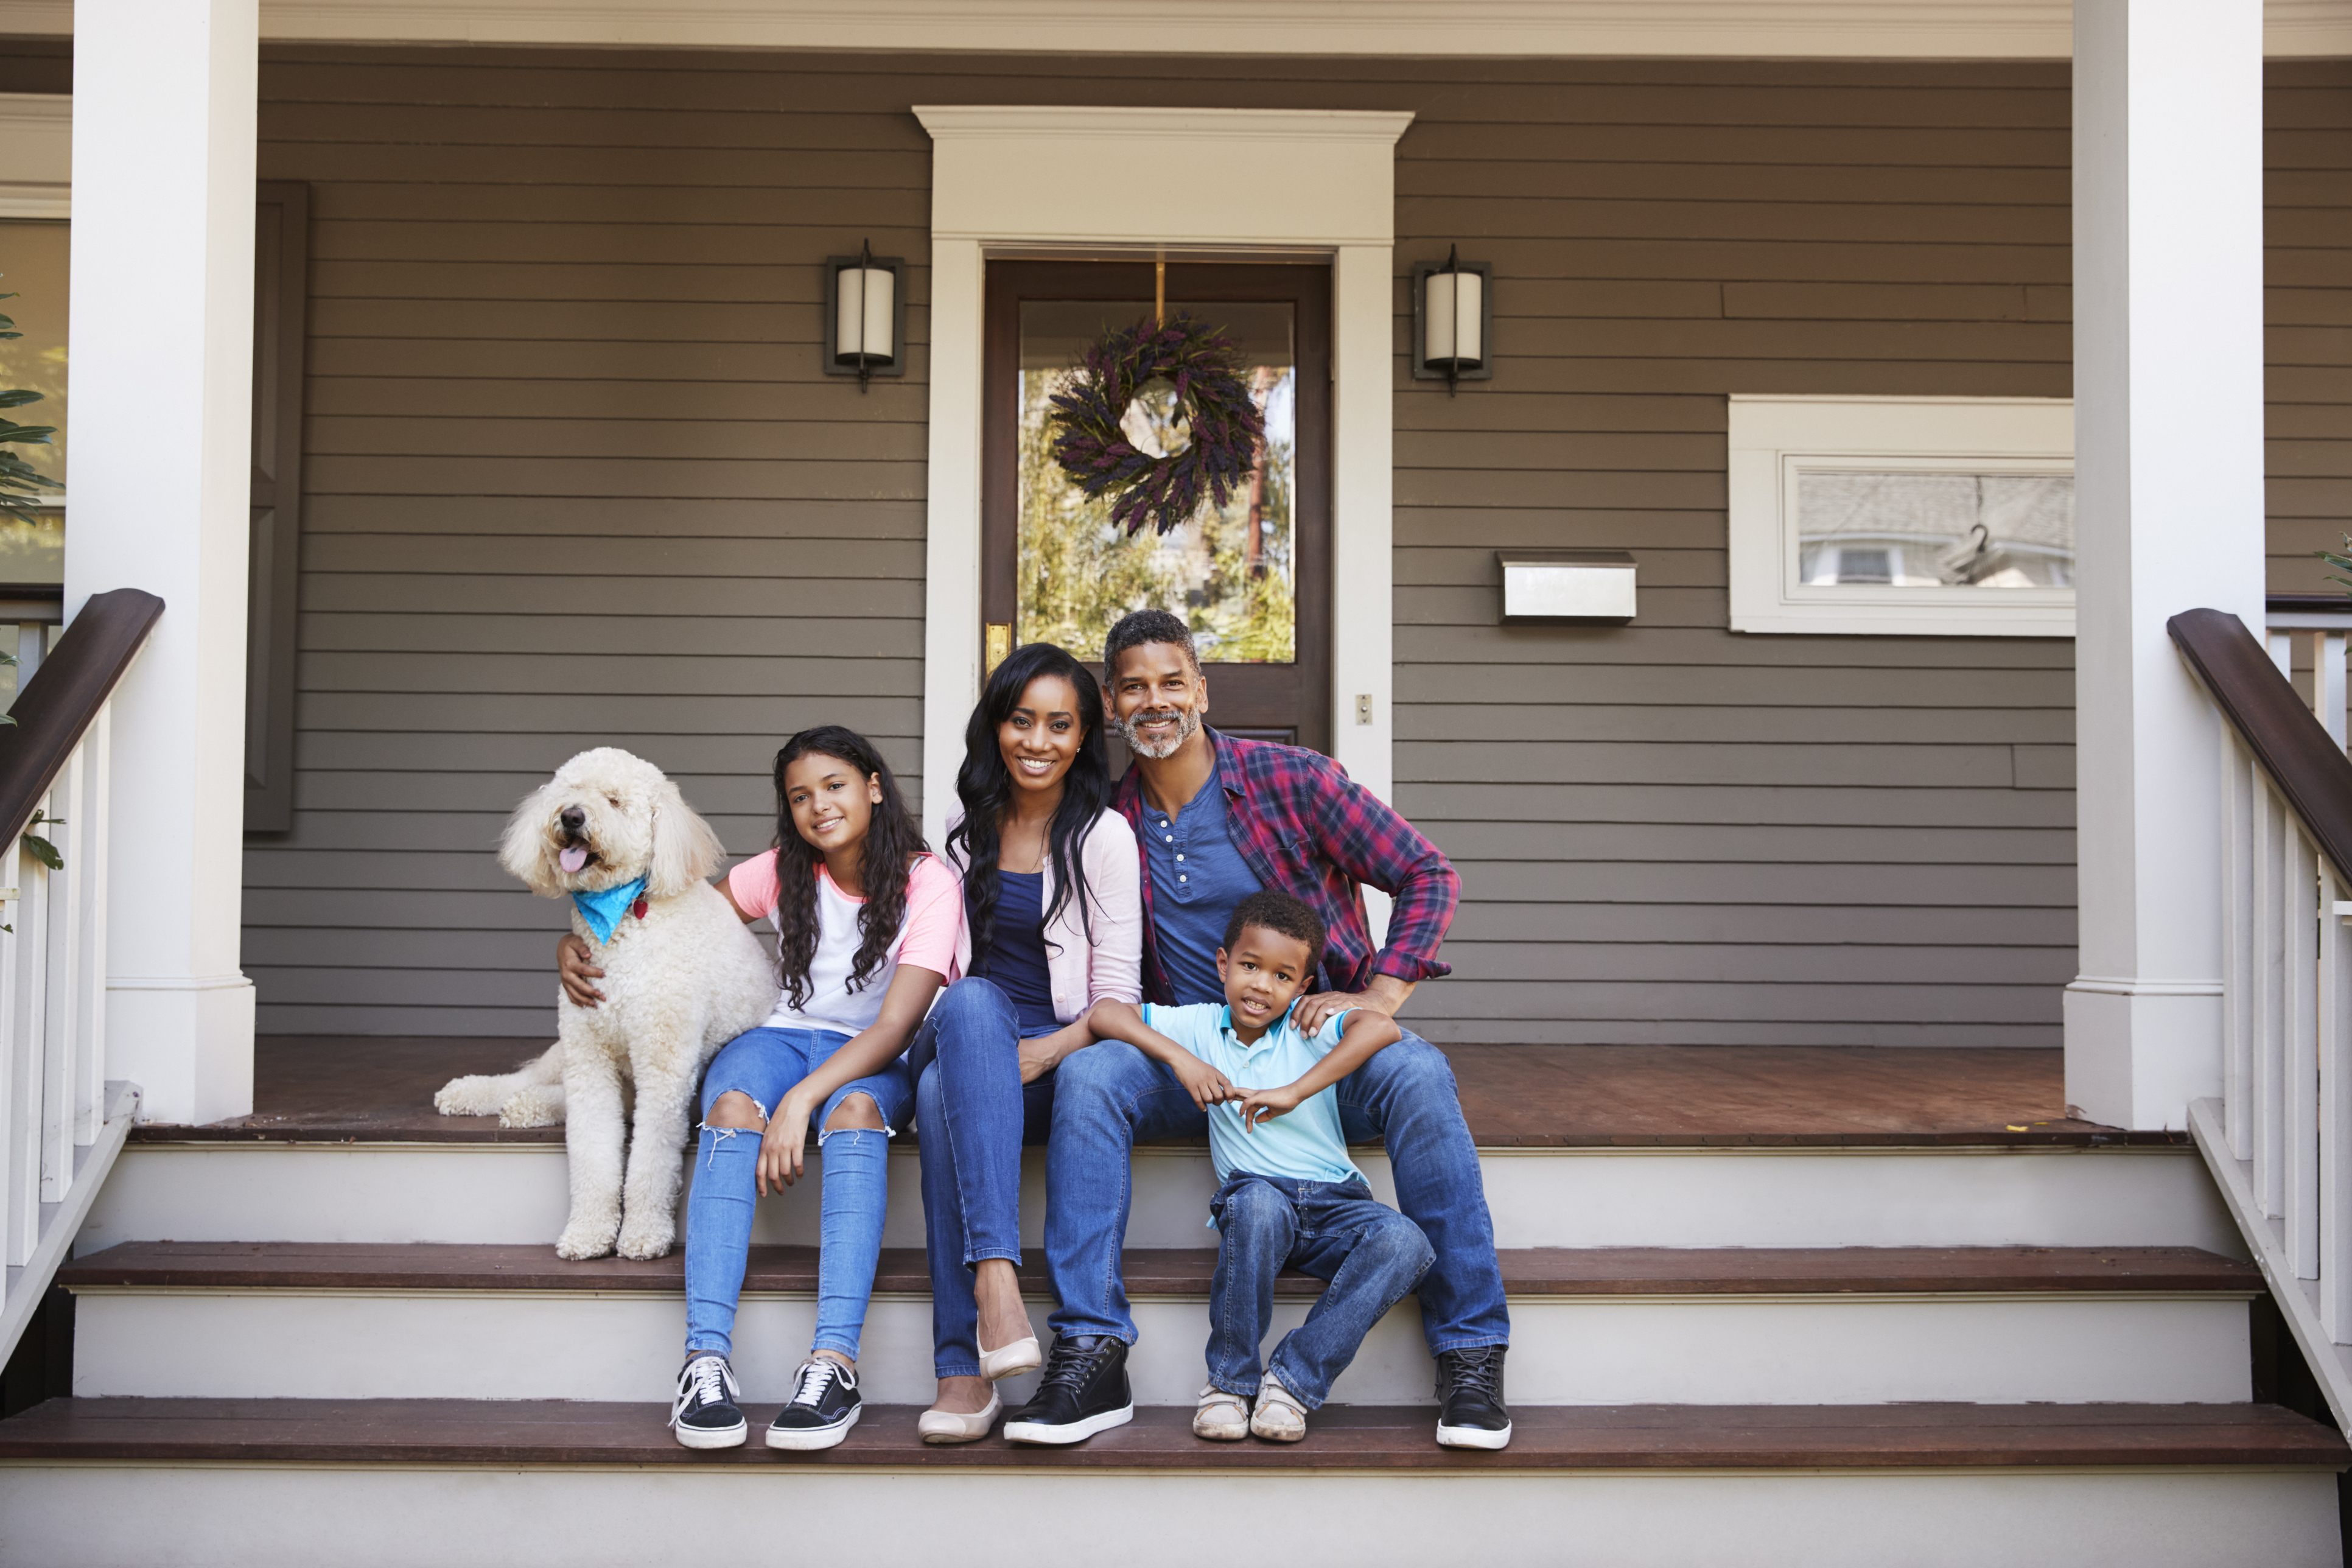 Get Mortgage Ready in Five Steps 